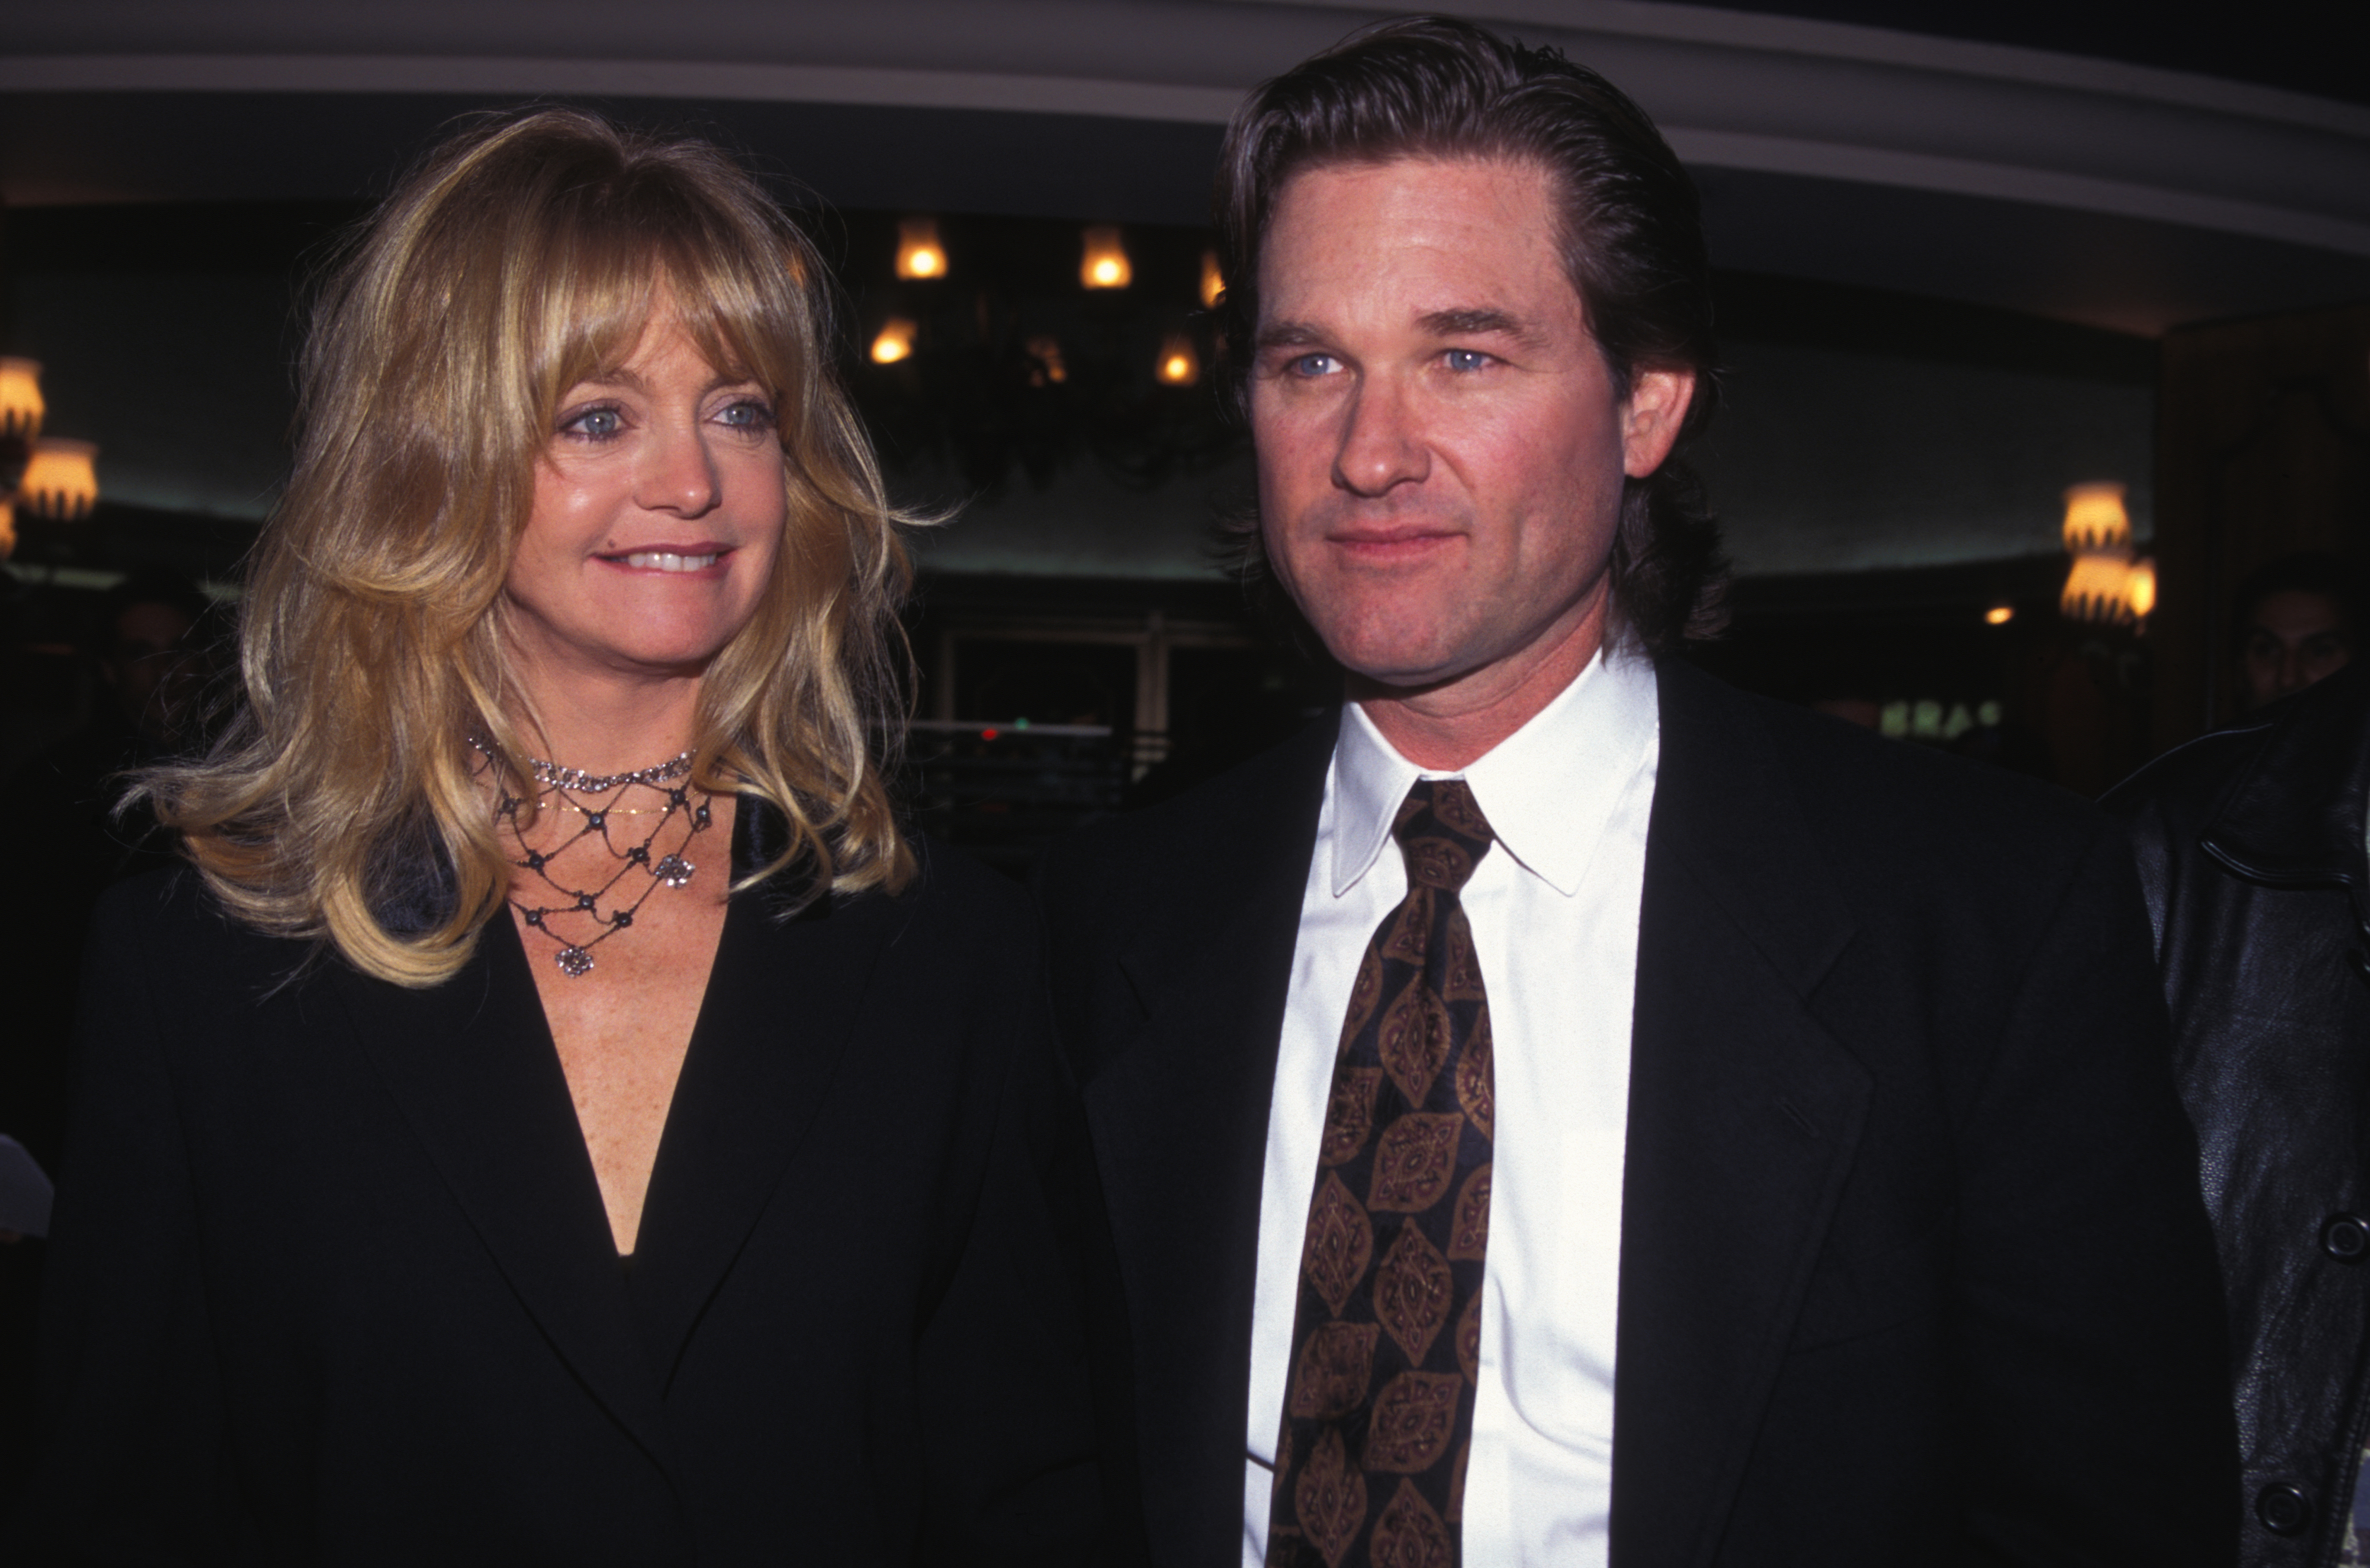 Goldie Hawn and Kurt Russell in 1995 in Paris, France. | Source: Getty Images